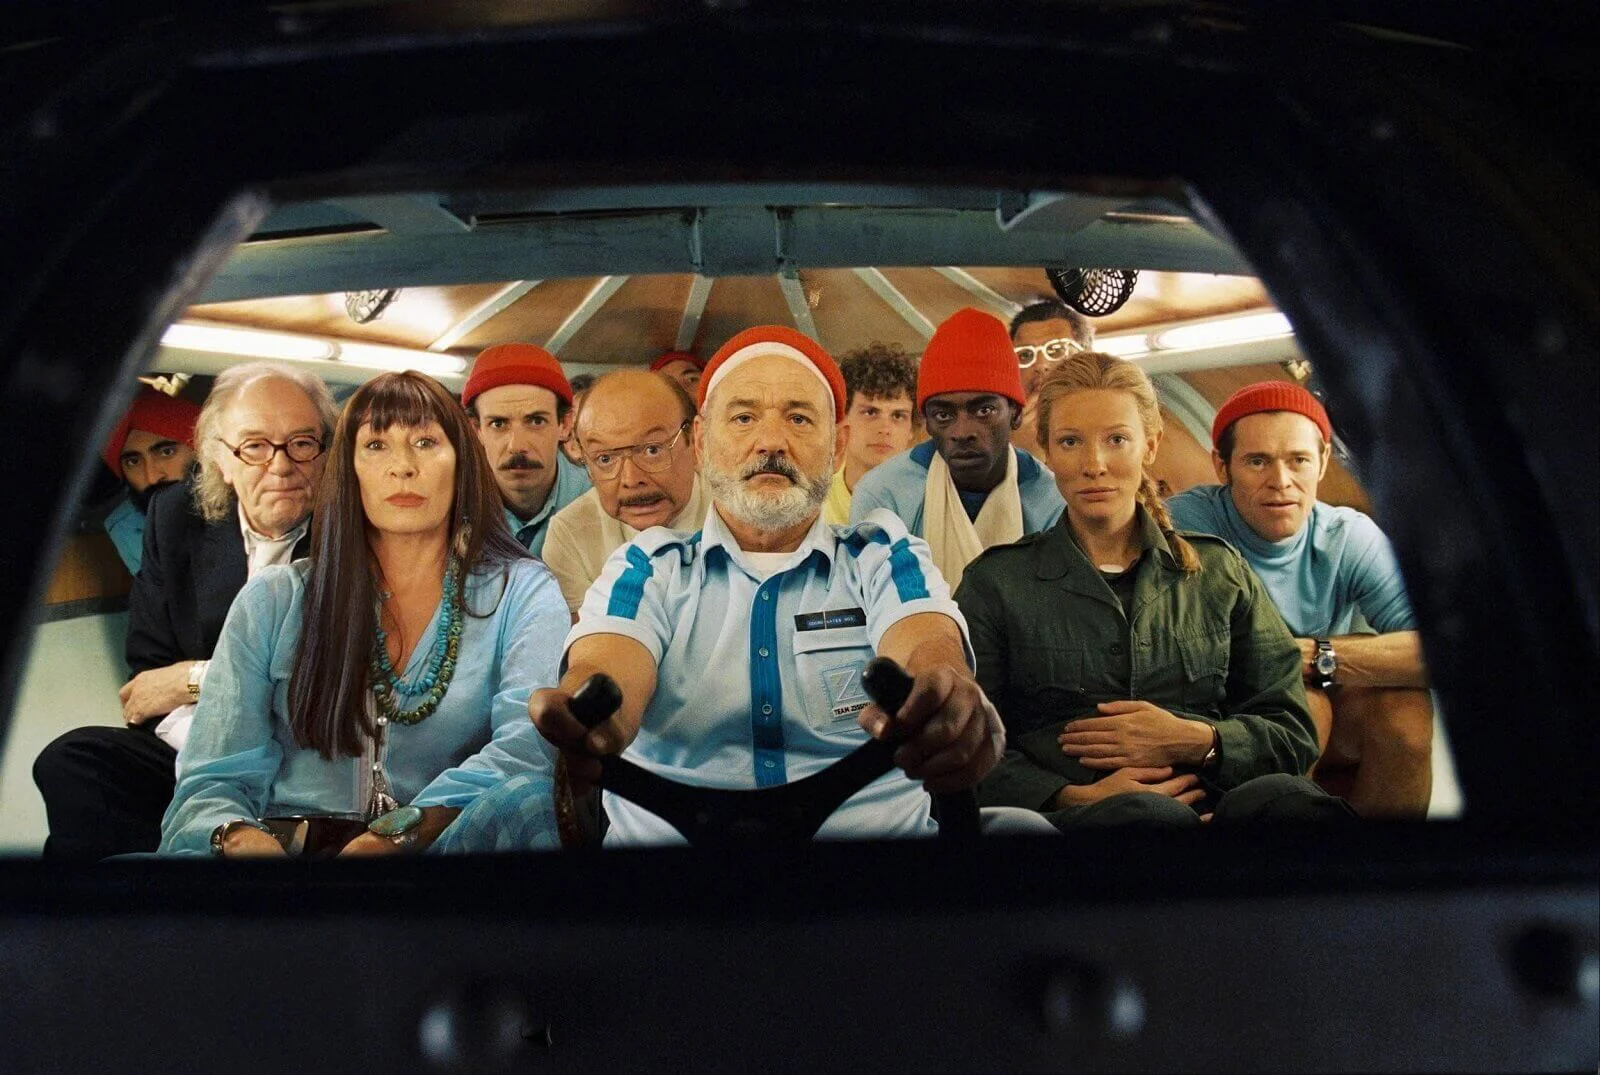 Wes Anderson Color Palette - Wes Anderson Colour Grading on Life Aquatic